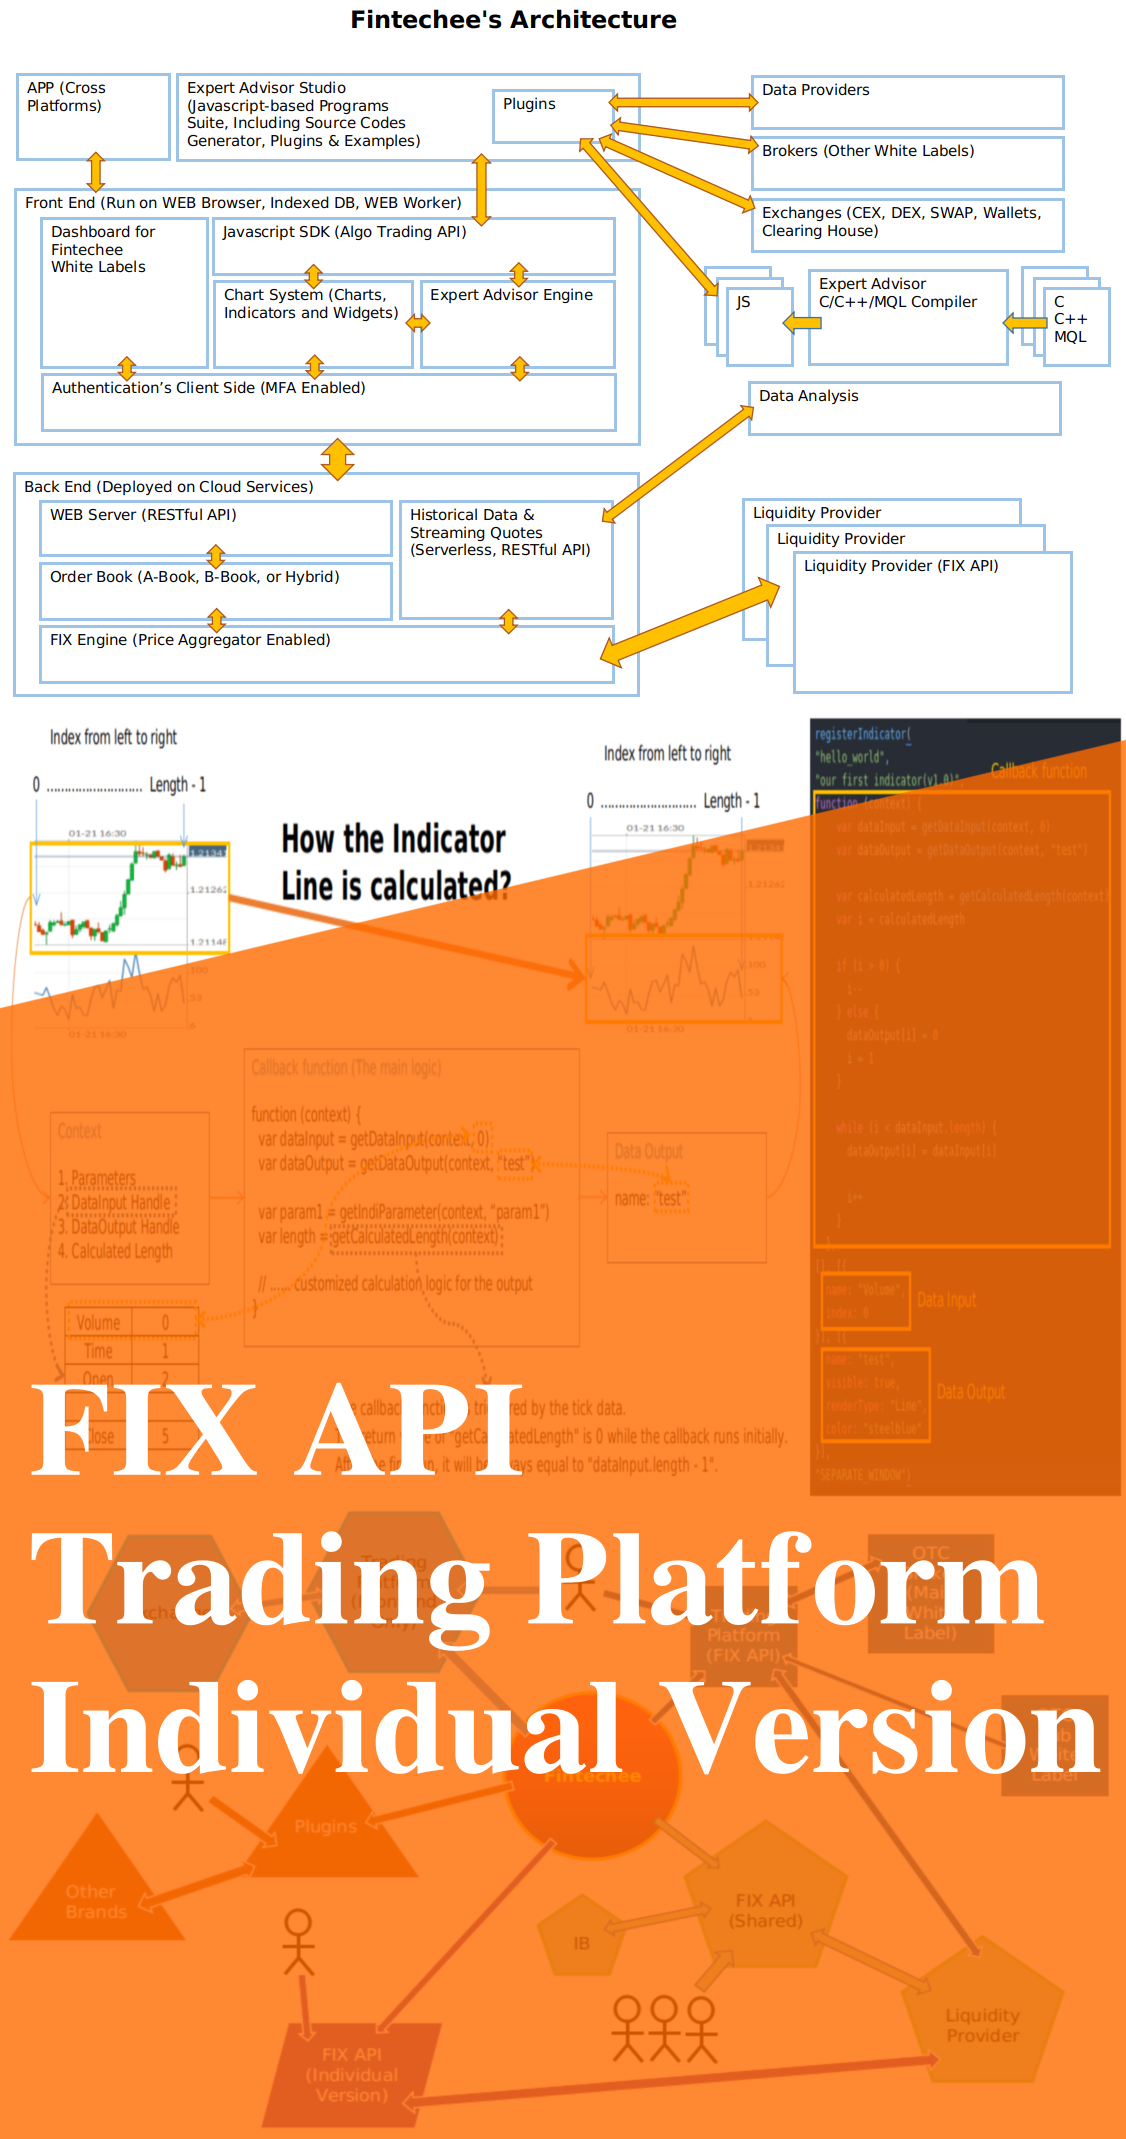 Fintechee provides a trading platform white label for institutions and a FIX API trading platform for individual traders